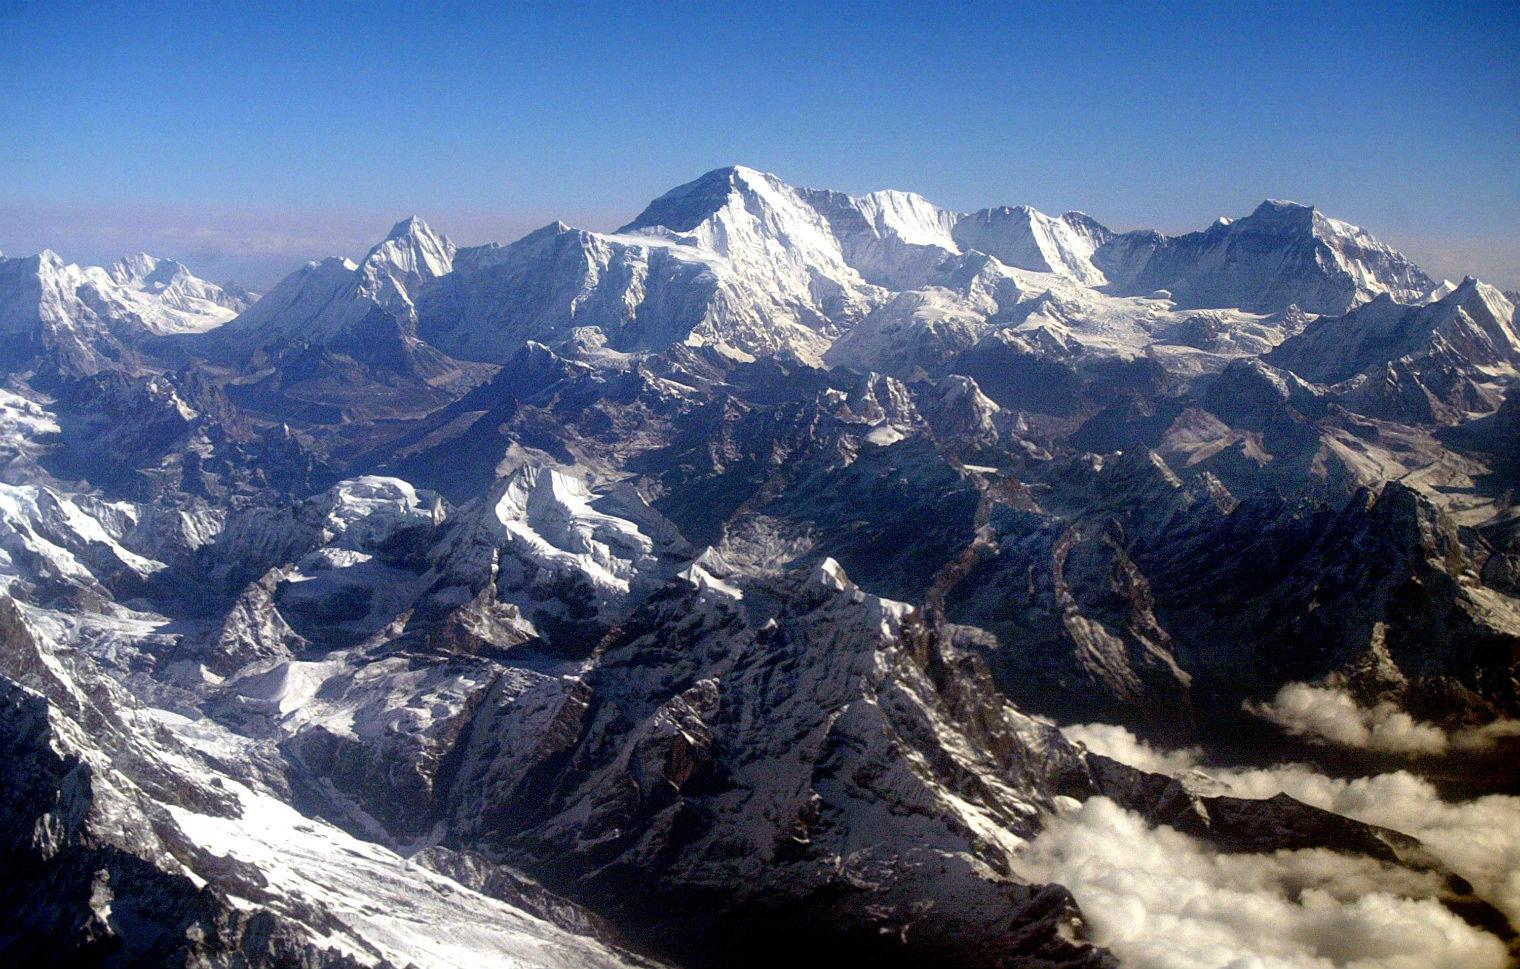 Mt Everest is now about an inch shorter than it was before (Picture: Getty)